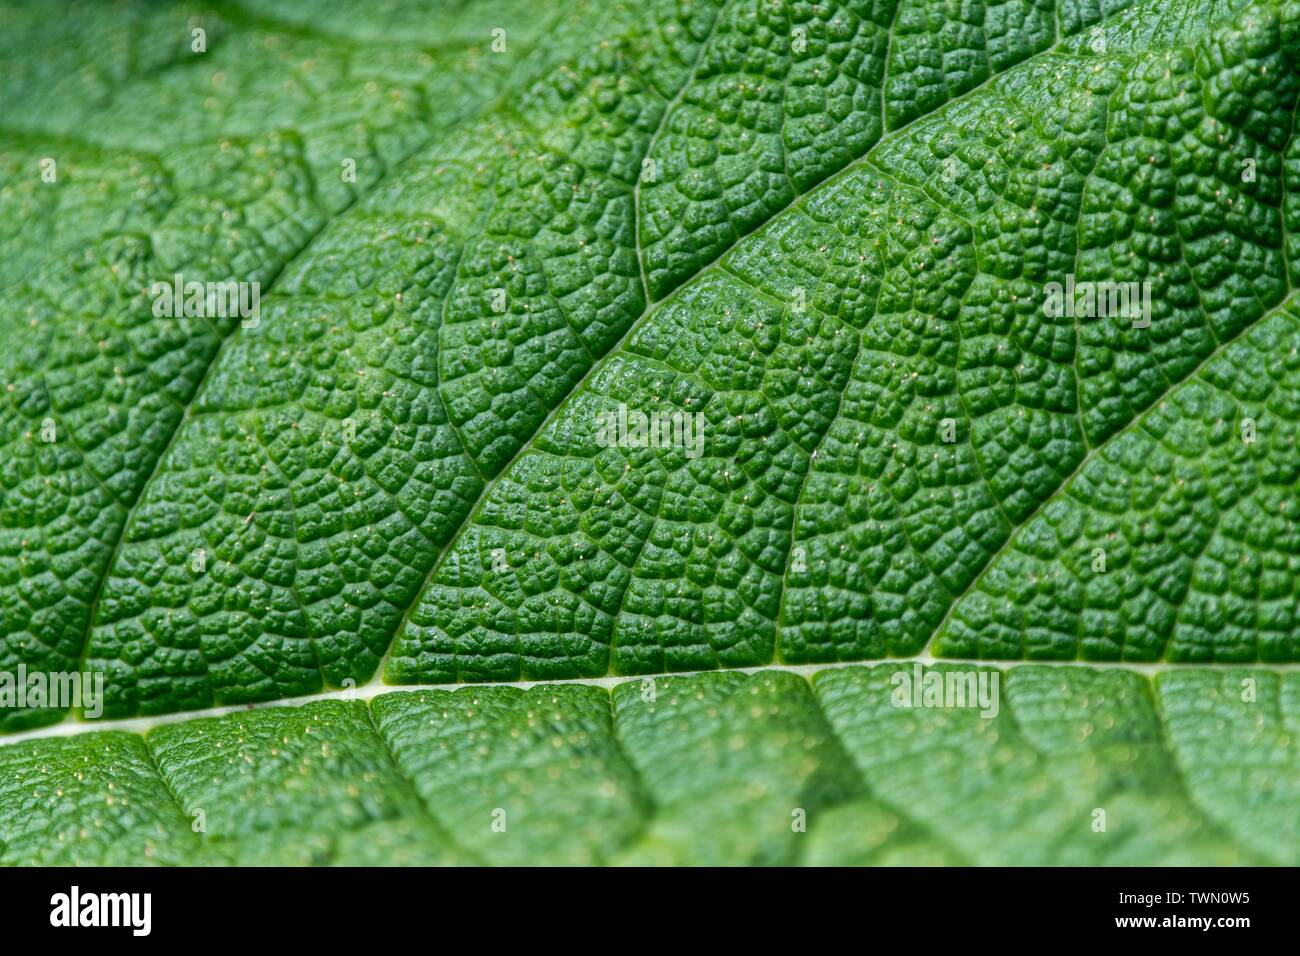 A close up photo of the veins and patterns in a green leaf Stock Photo